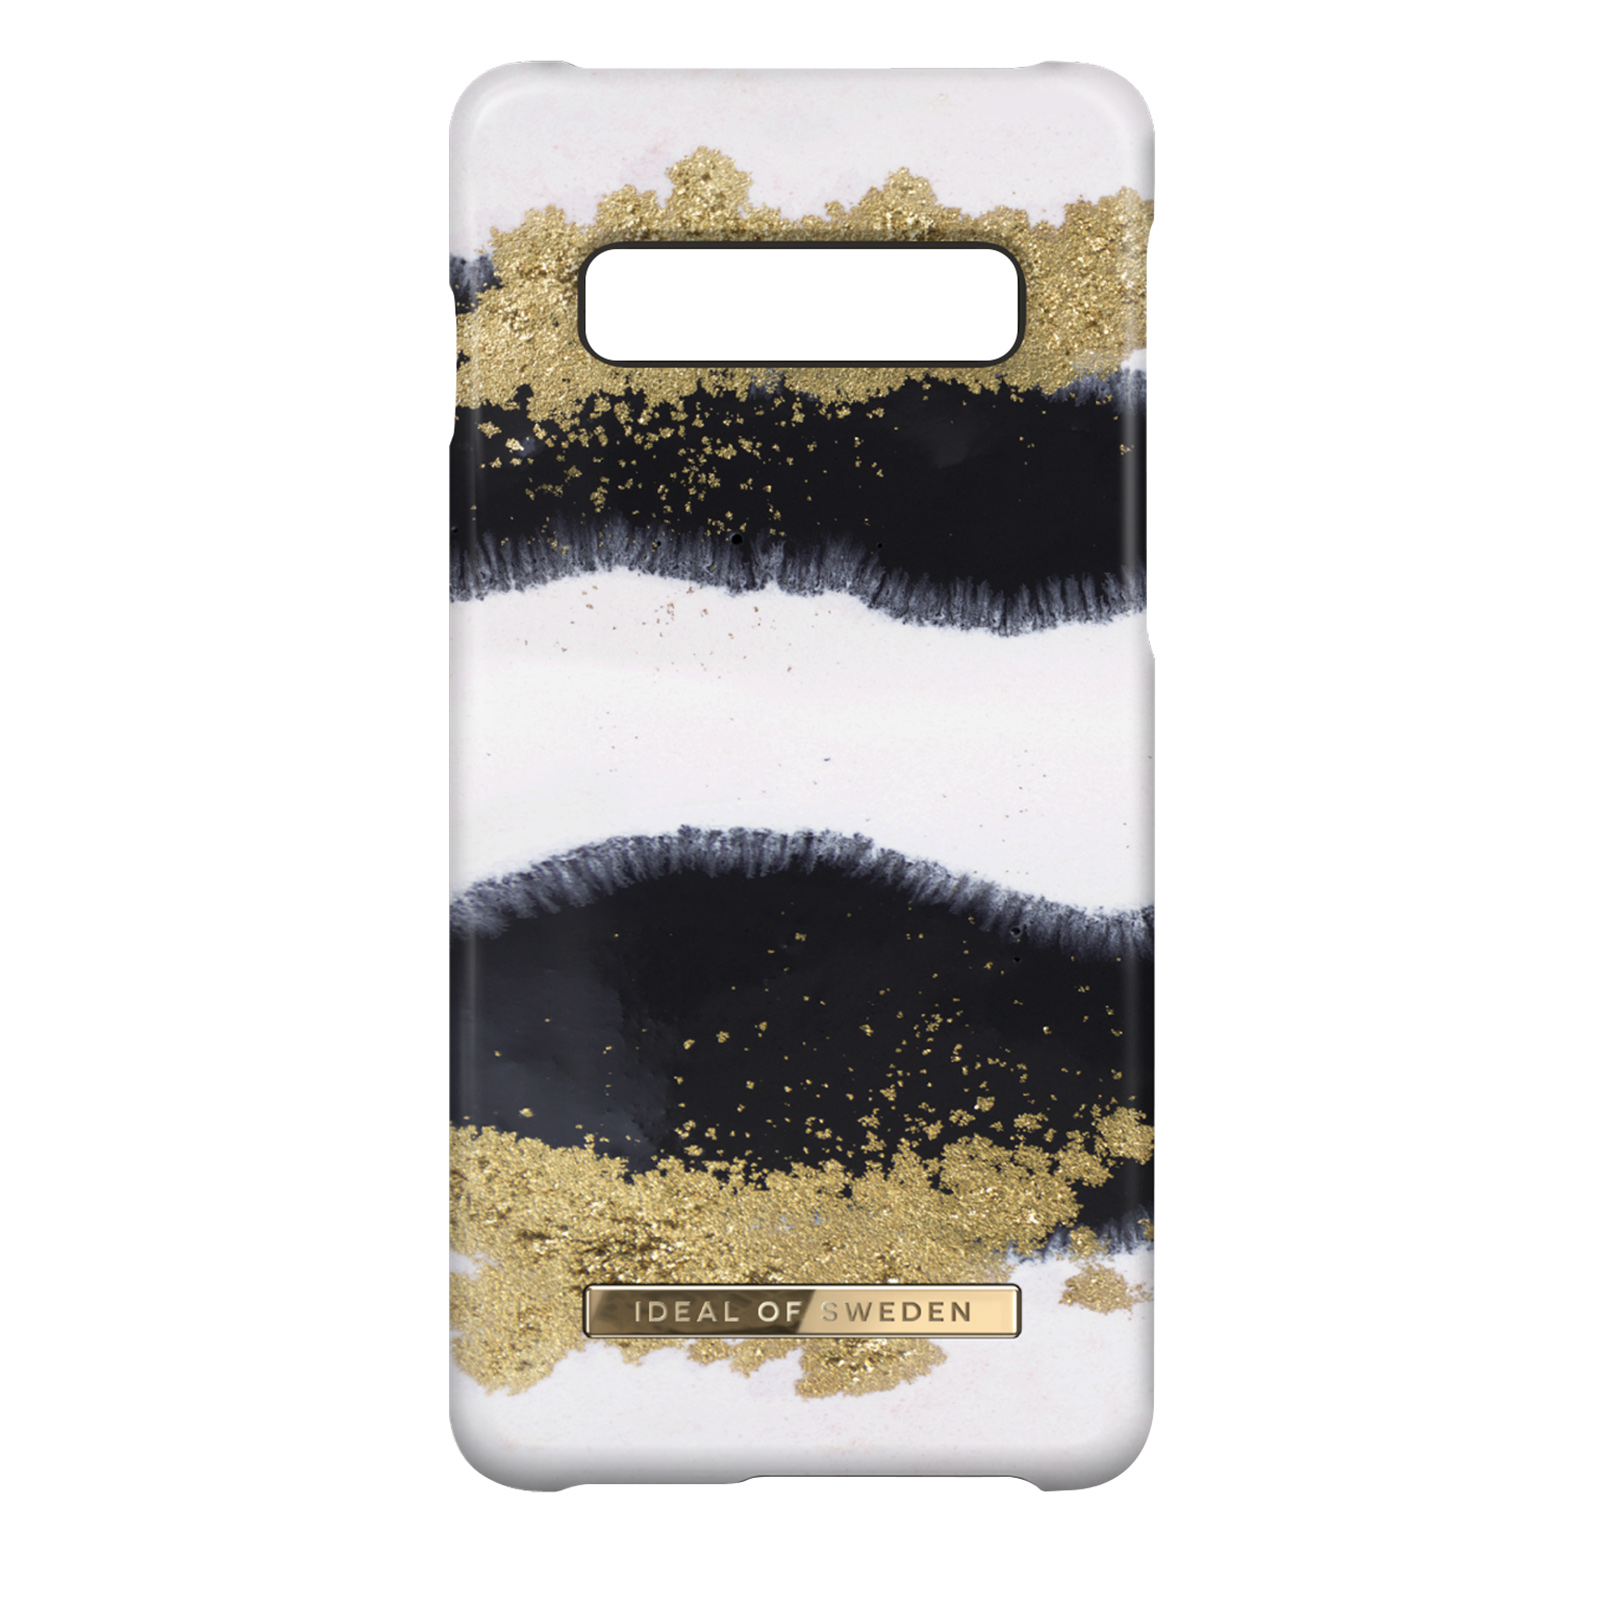 IDEAL OF Galaxy Backcover, SWEDEN Licorice Gleaming Series, S10, Gold Samsung